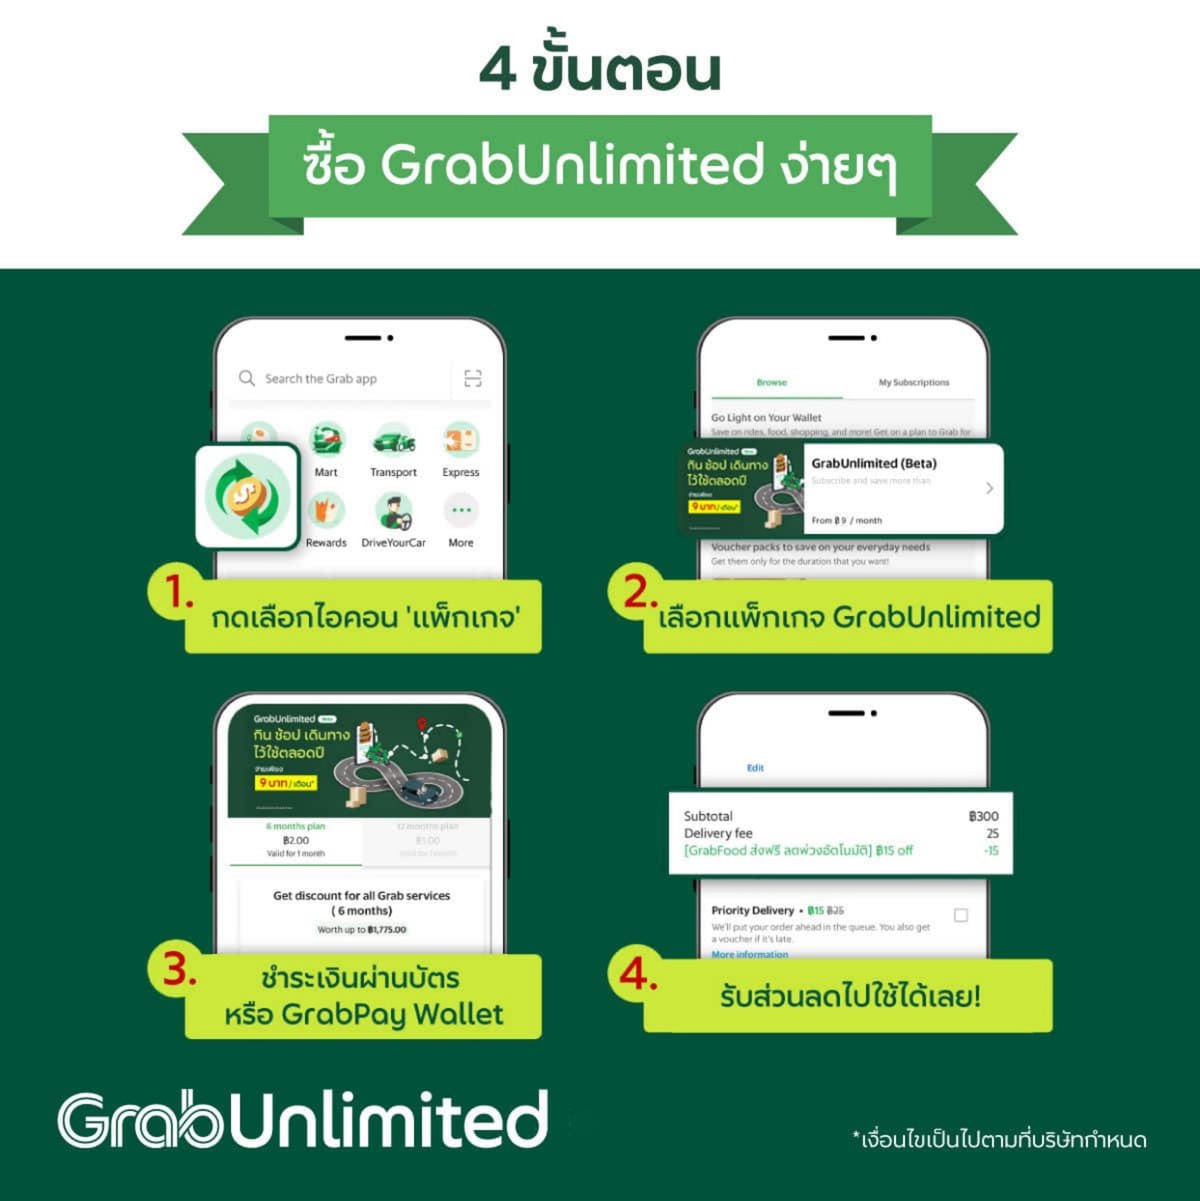 Grab launches GrabUnlimited monthly membership package to tackle rising cost of living, starting from 1 THB across all services